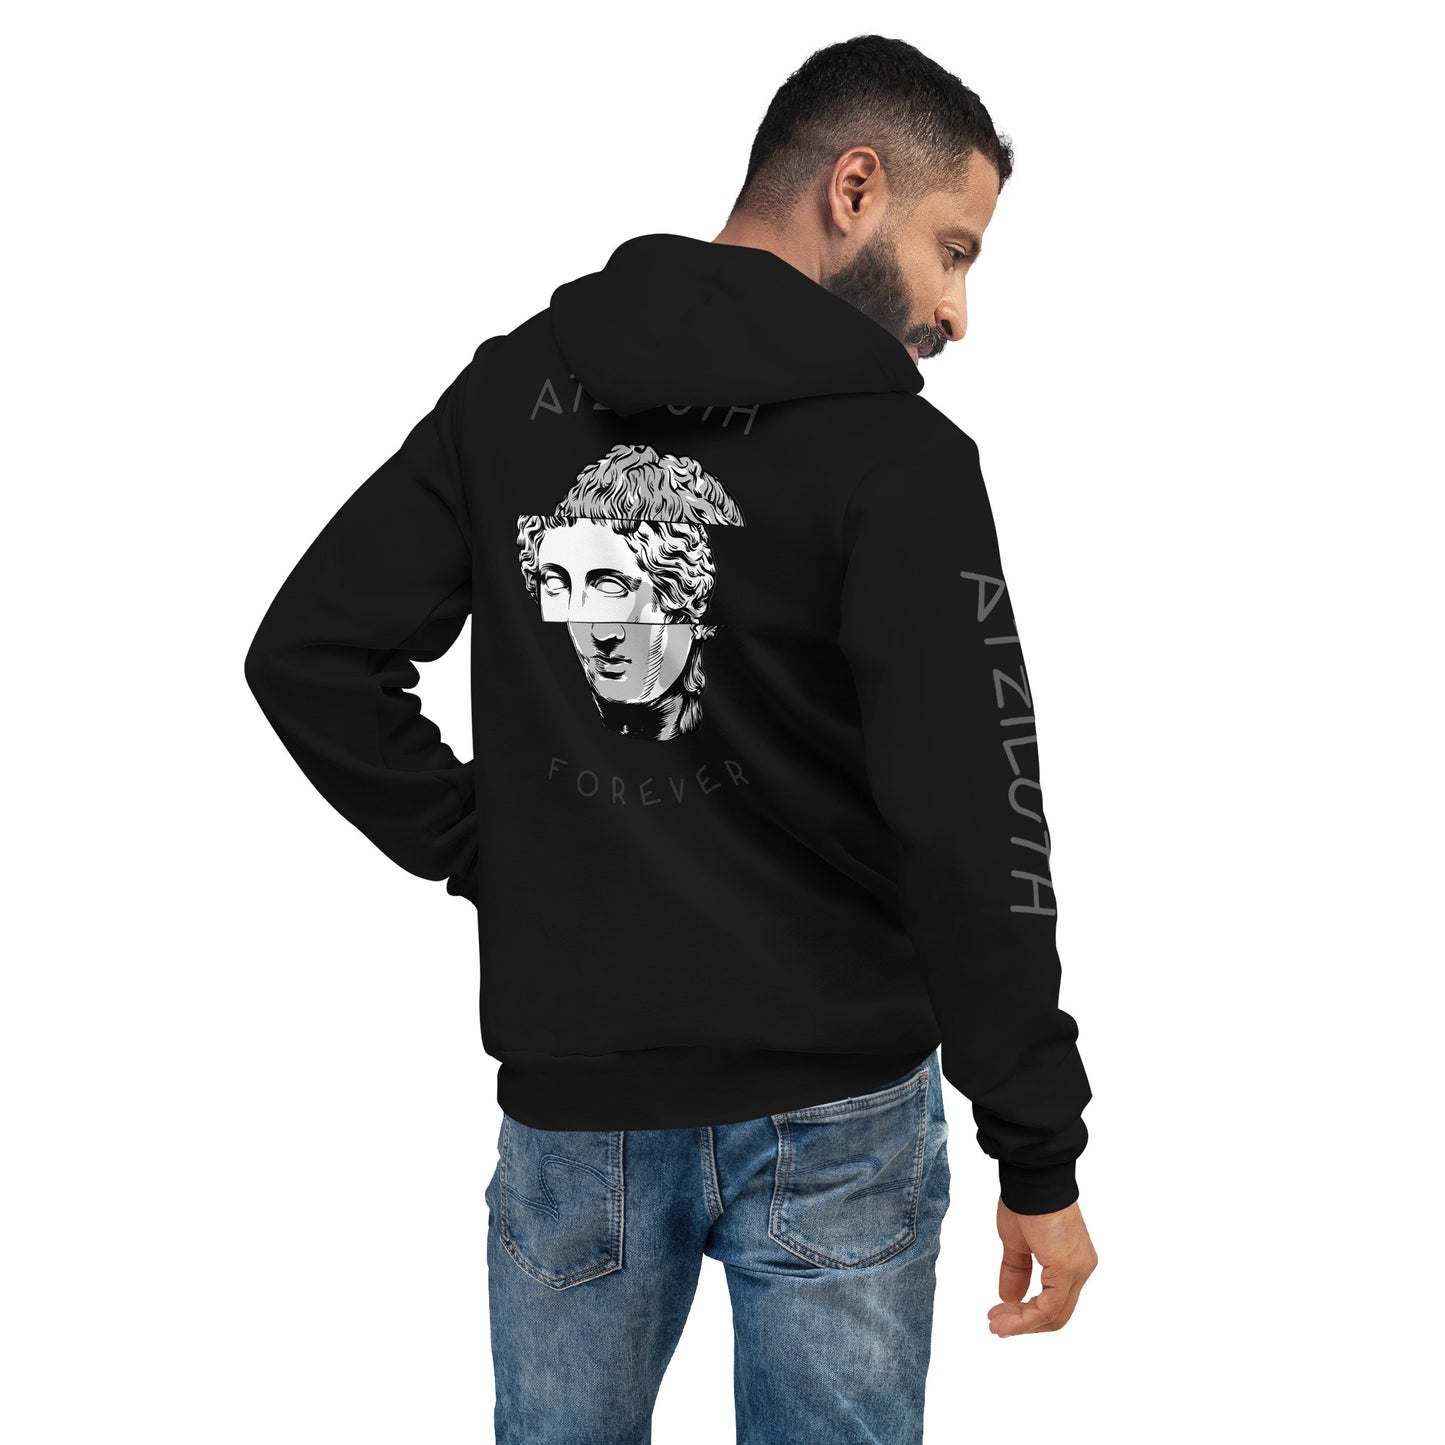 Atziluth "Forever" hoodie